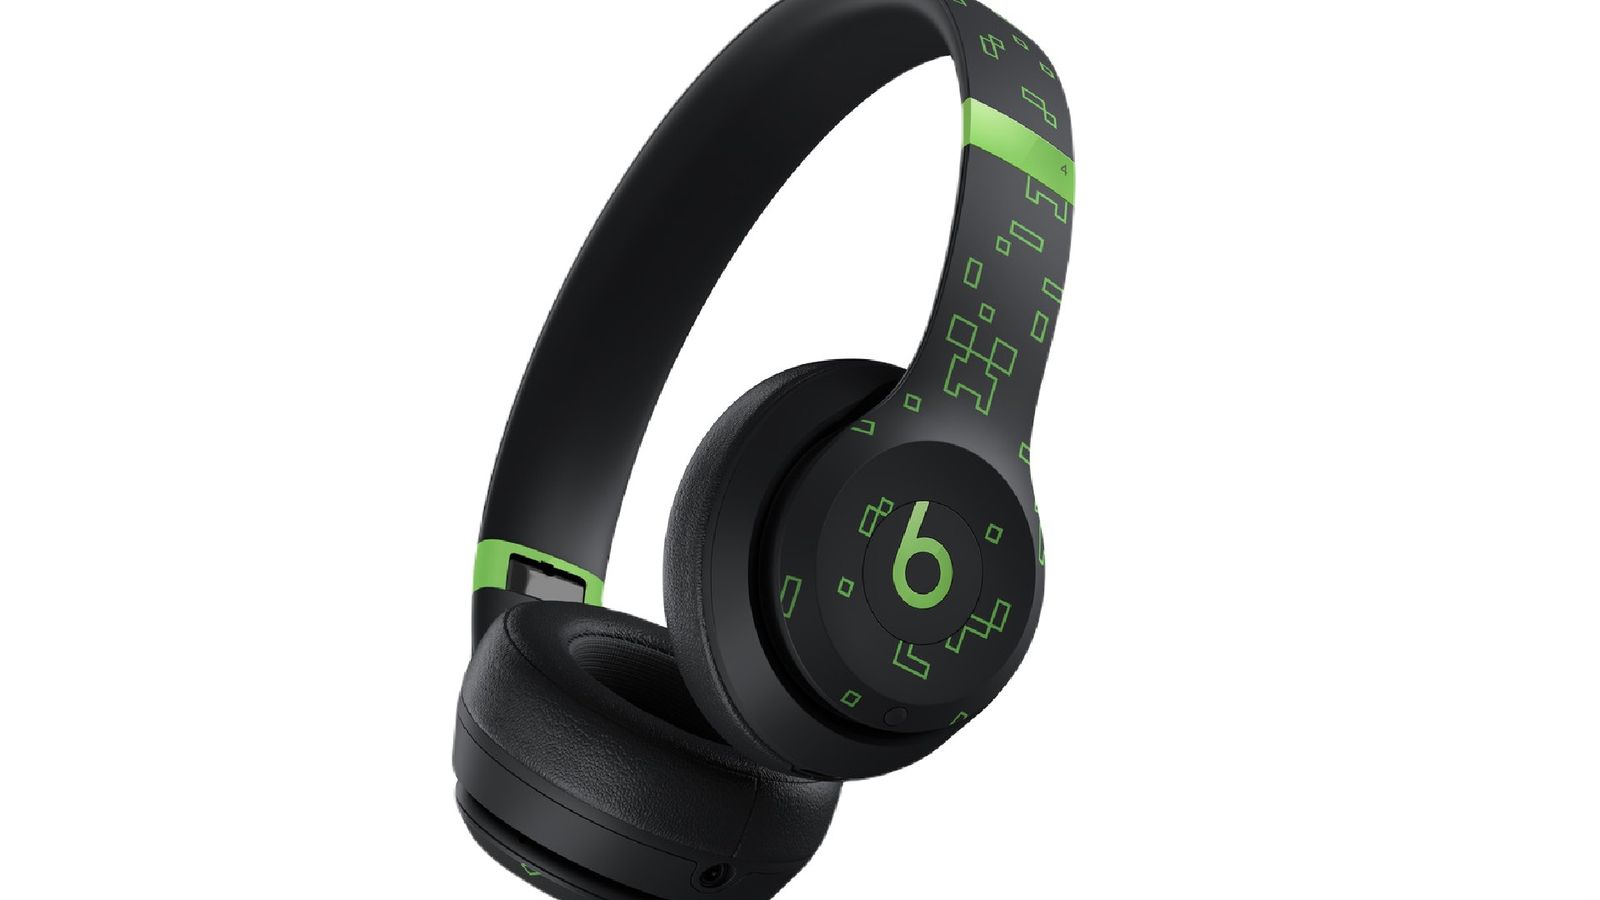 Beats Solo 4 Headphones Minecraft Edition in black with green accents